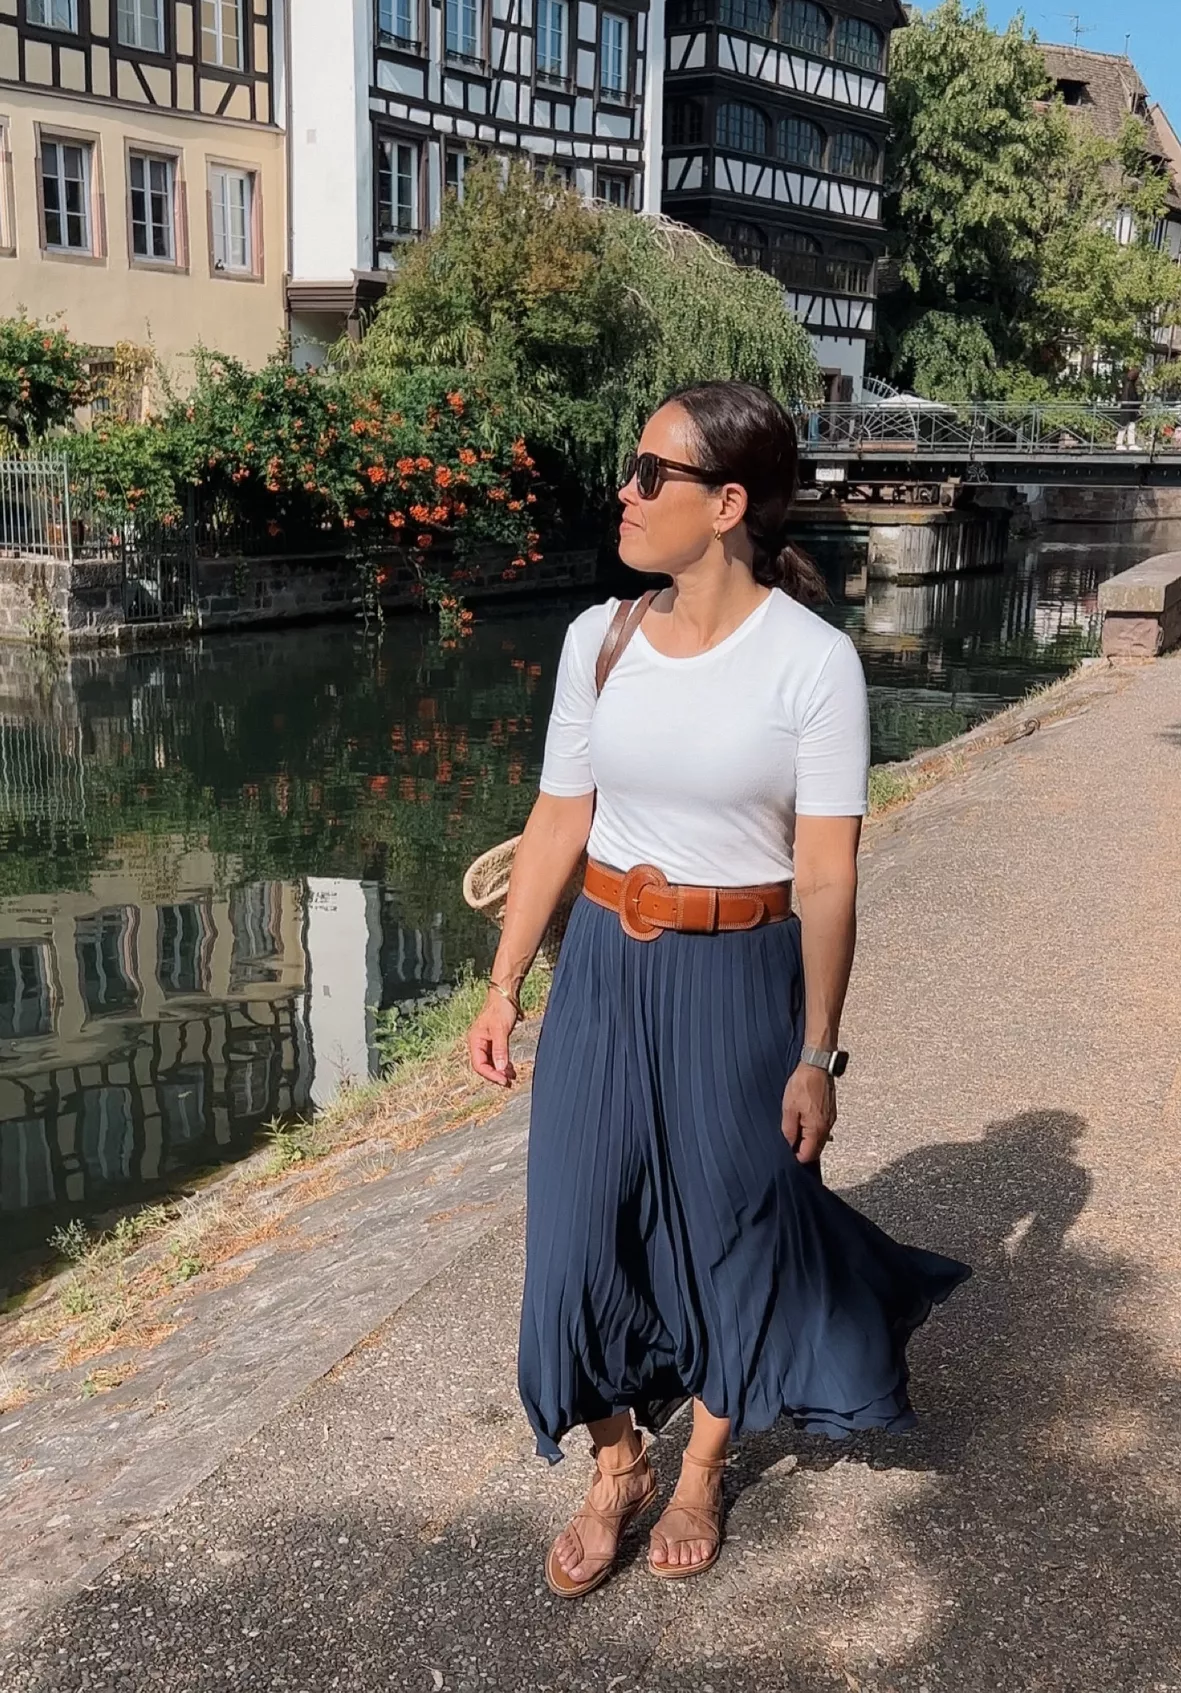 Style Help: How to rock a French style outfit - The Belt Edition